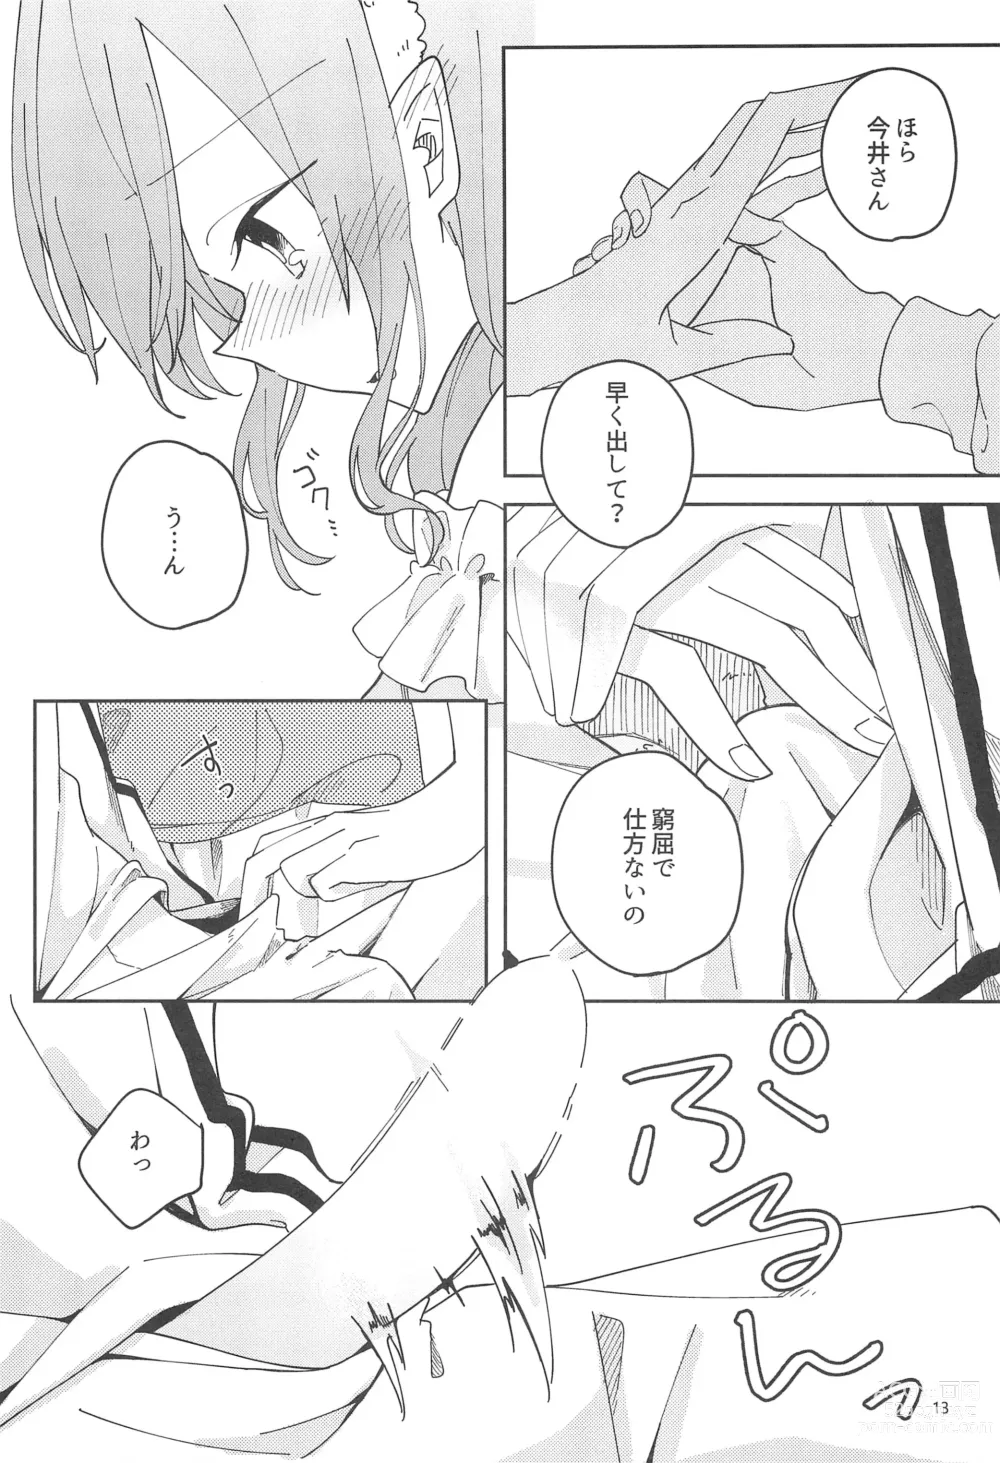 Page 15 of doujinshi I’m crazy about you.